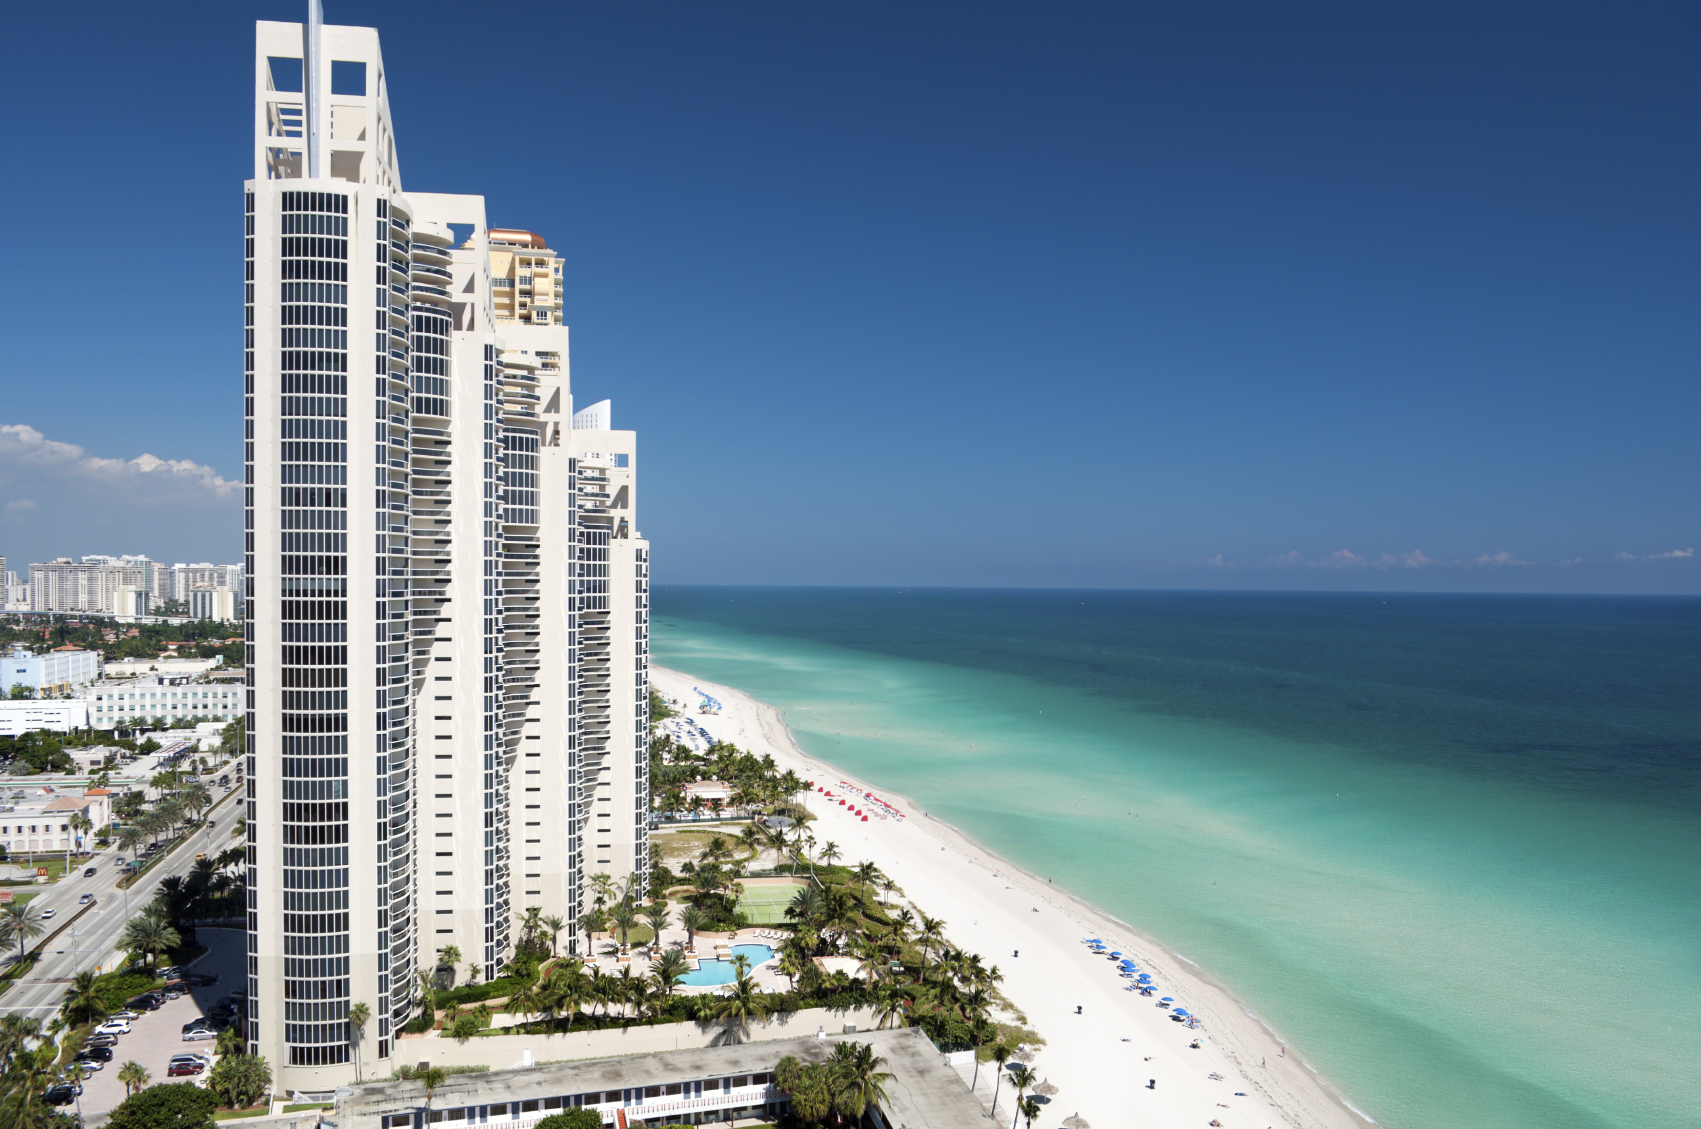 aerial view of the skyline of Sunny Isles Beach, Miami, Florida